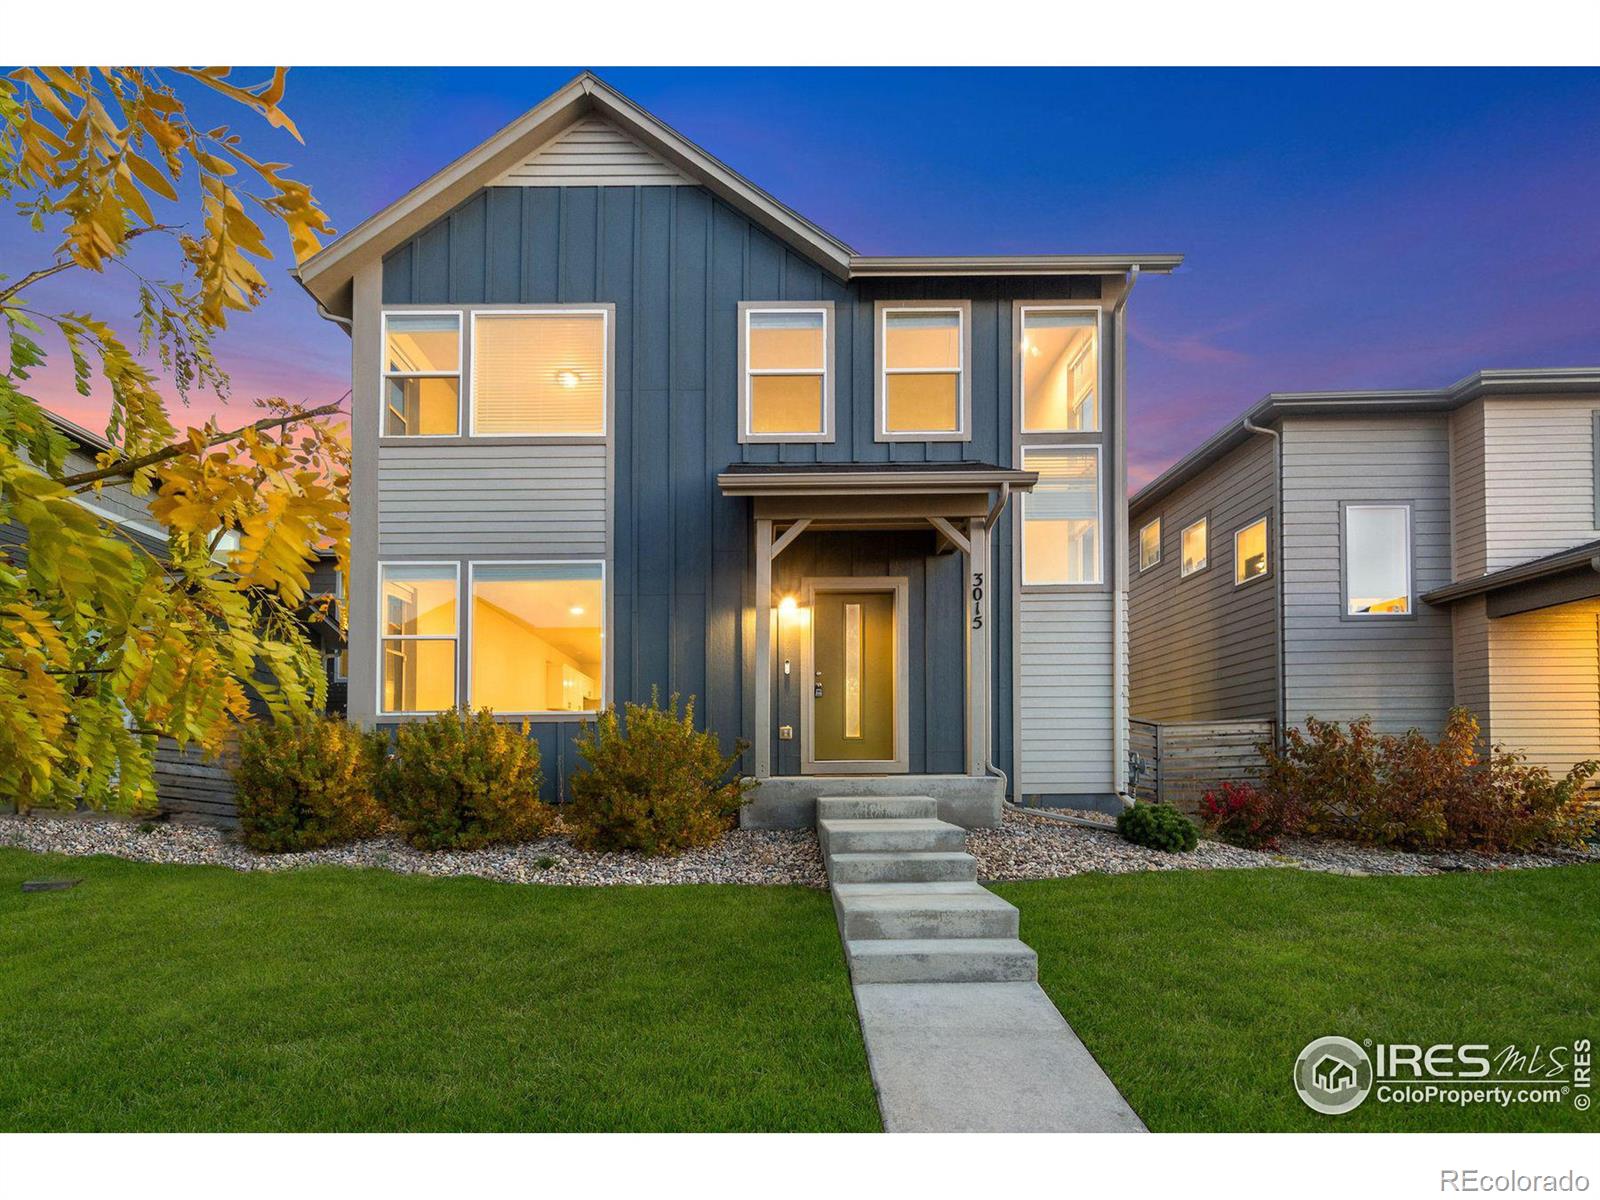 3015  Conquest Street, fort collins MLS: 4567891001831 Beds: 3 Baths: 3 Price: $595,000